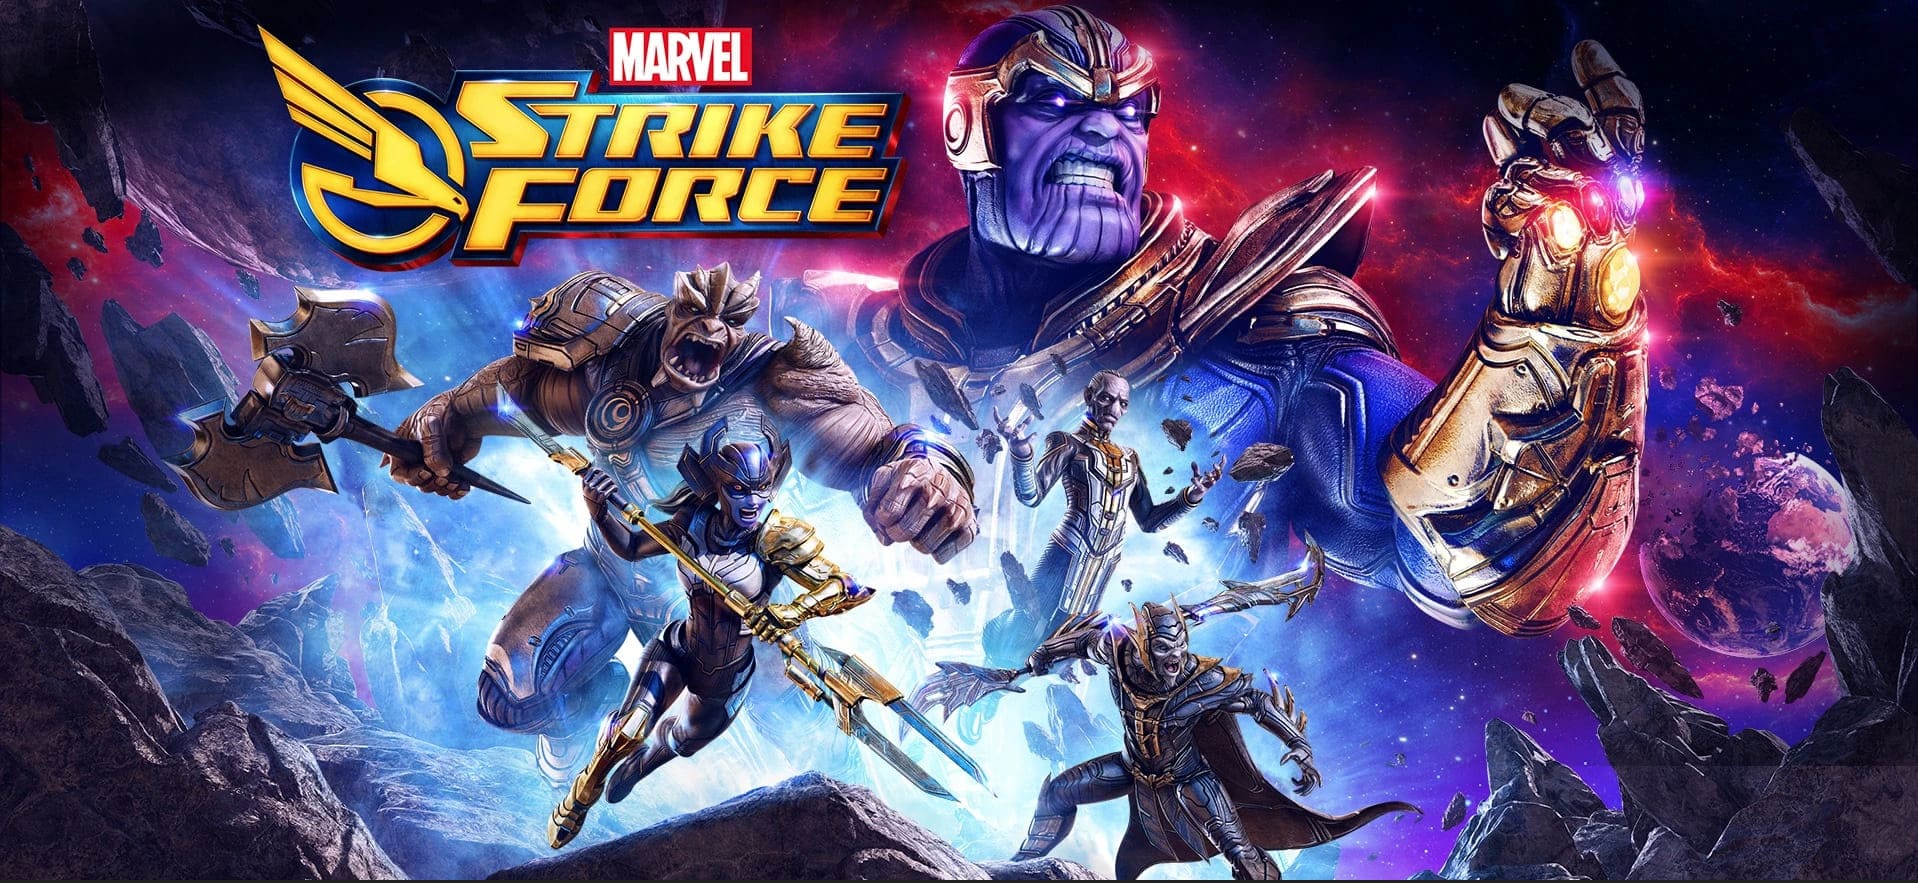 Thanos and the Black Order are no threat to be taken lightly. With the power to erase half of existence in a single snap, you will want them on your side!